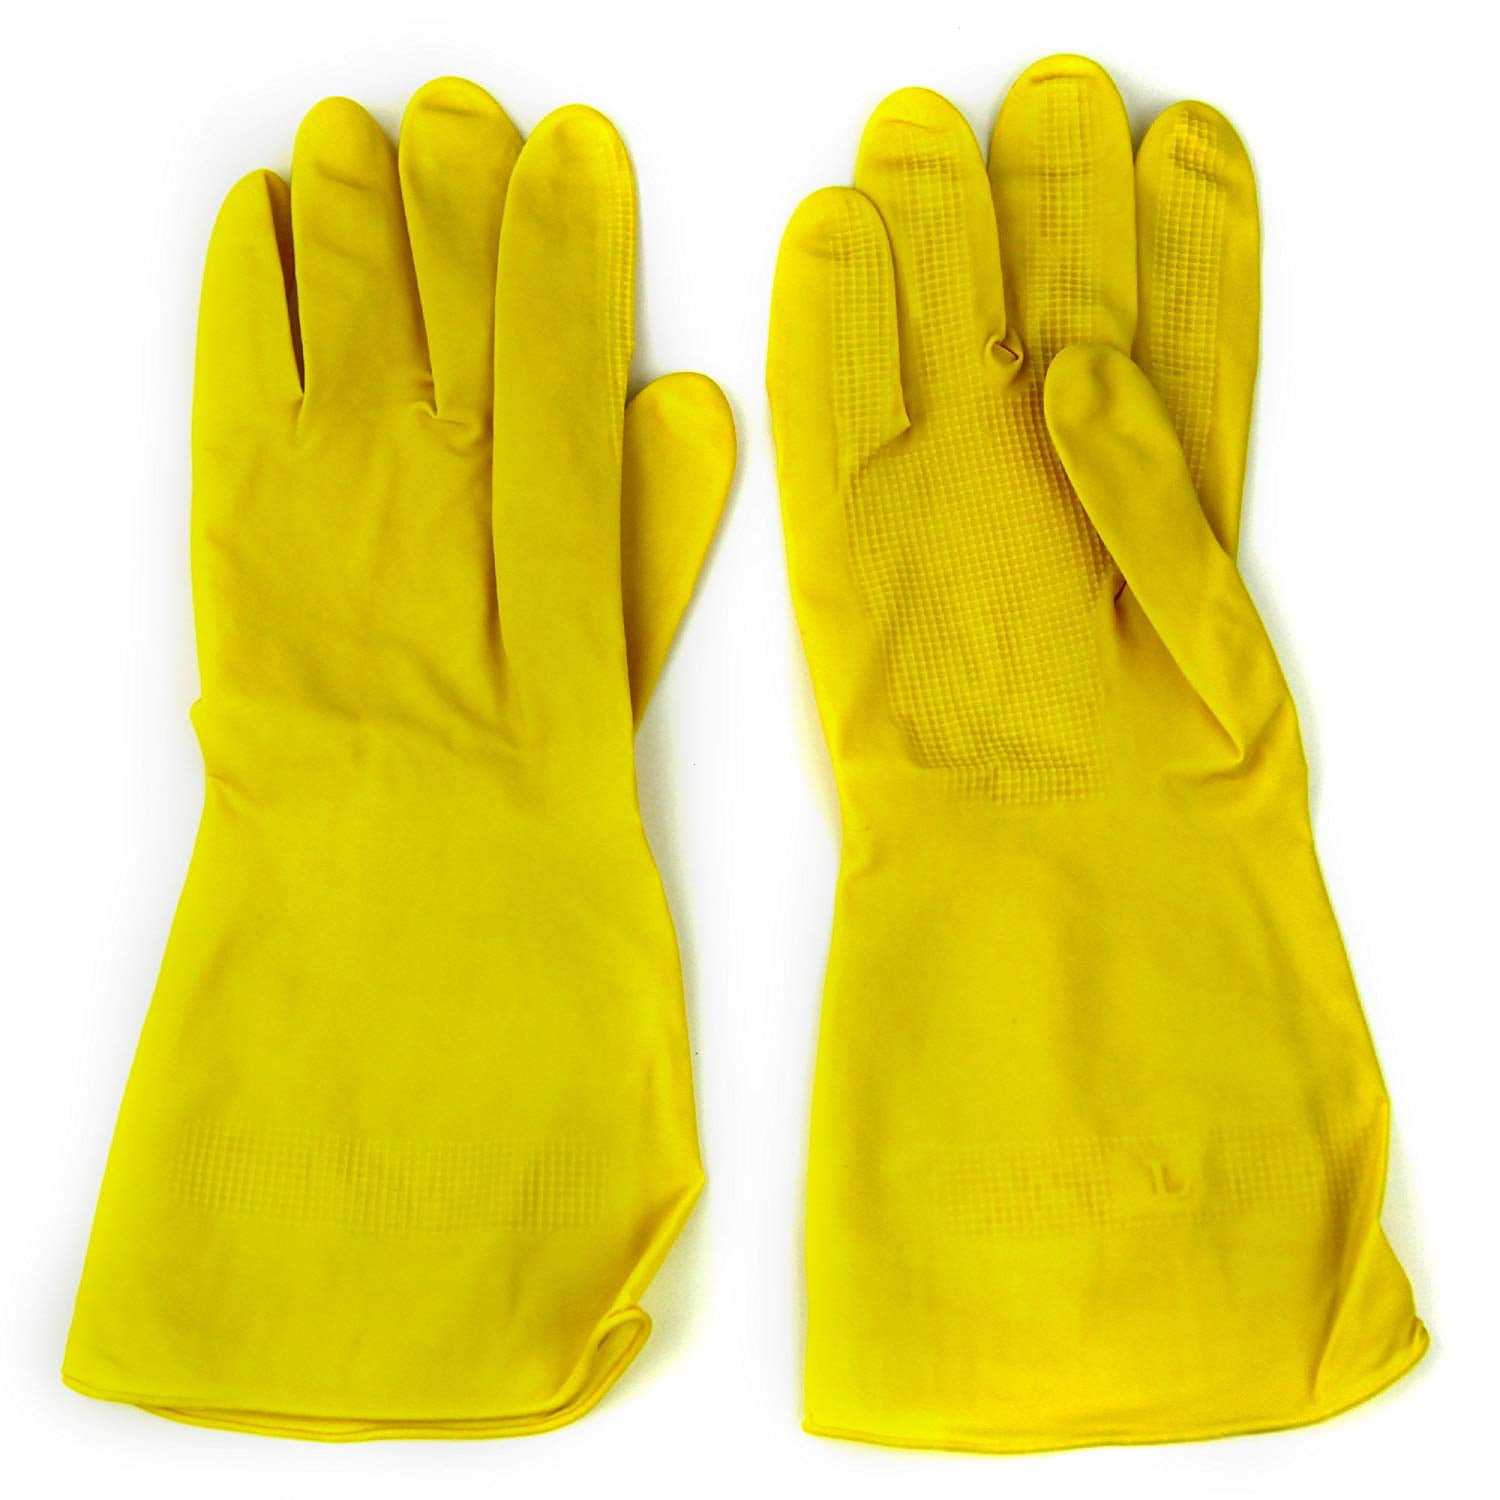 Safety Zone Yellow Flock Lined Latex Gloves - Chemical Protection - Medium  Size - Yellow - Fish Scale Grip, Flock-lined - For Dishwashing, Cleaning,  Meat Processing - 18 mil Thickness - 12 Glove Length - Reliable Paper